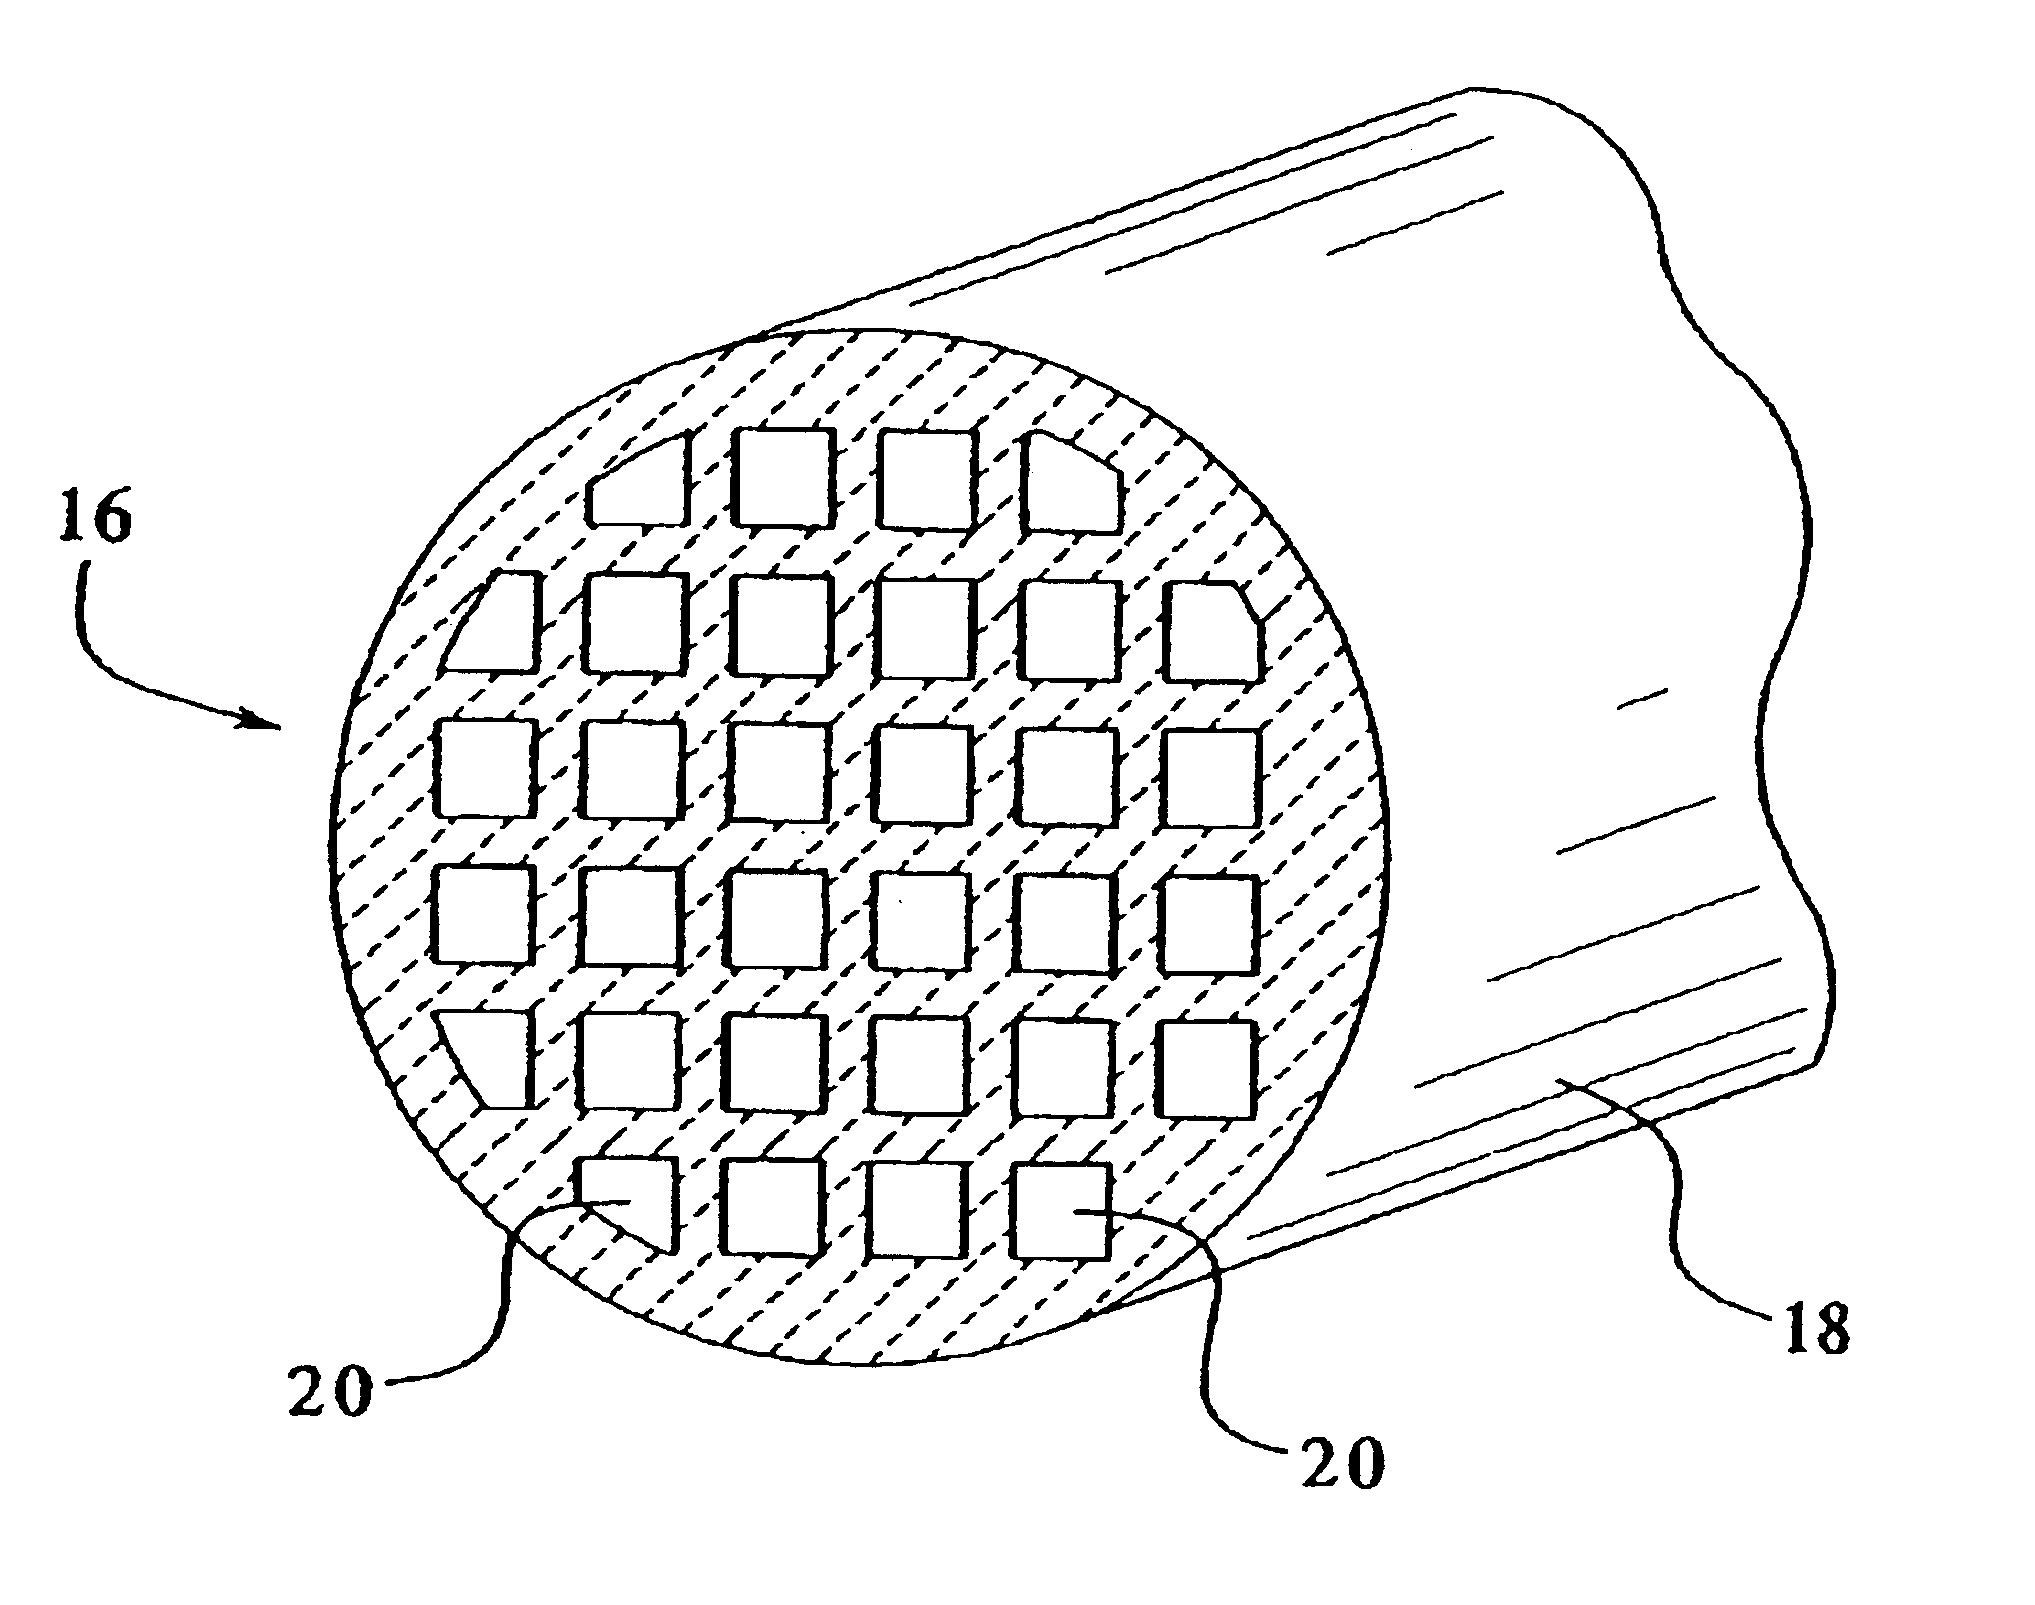 Apparatuses, devices, systems and methods employing far infrared radiation and negative ions